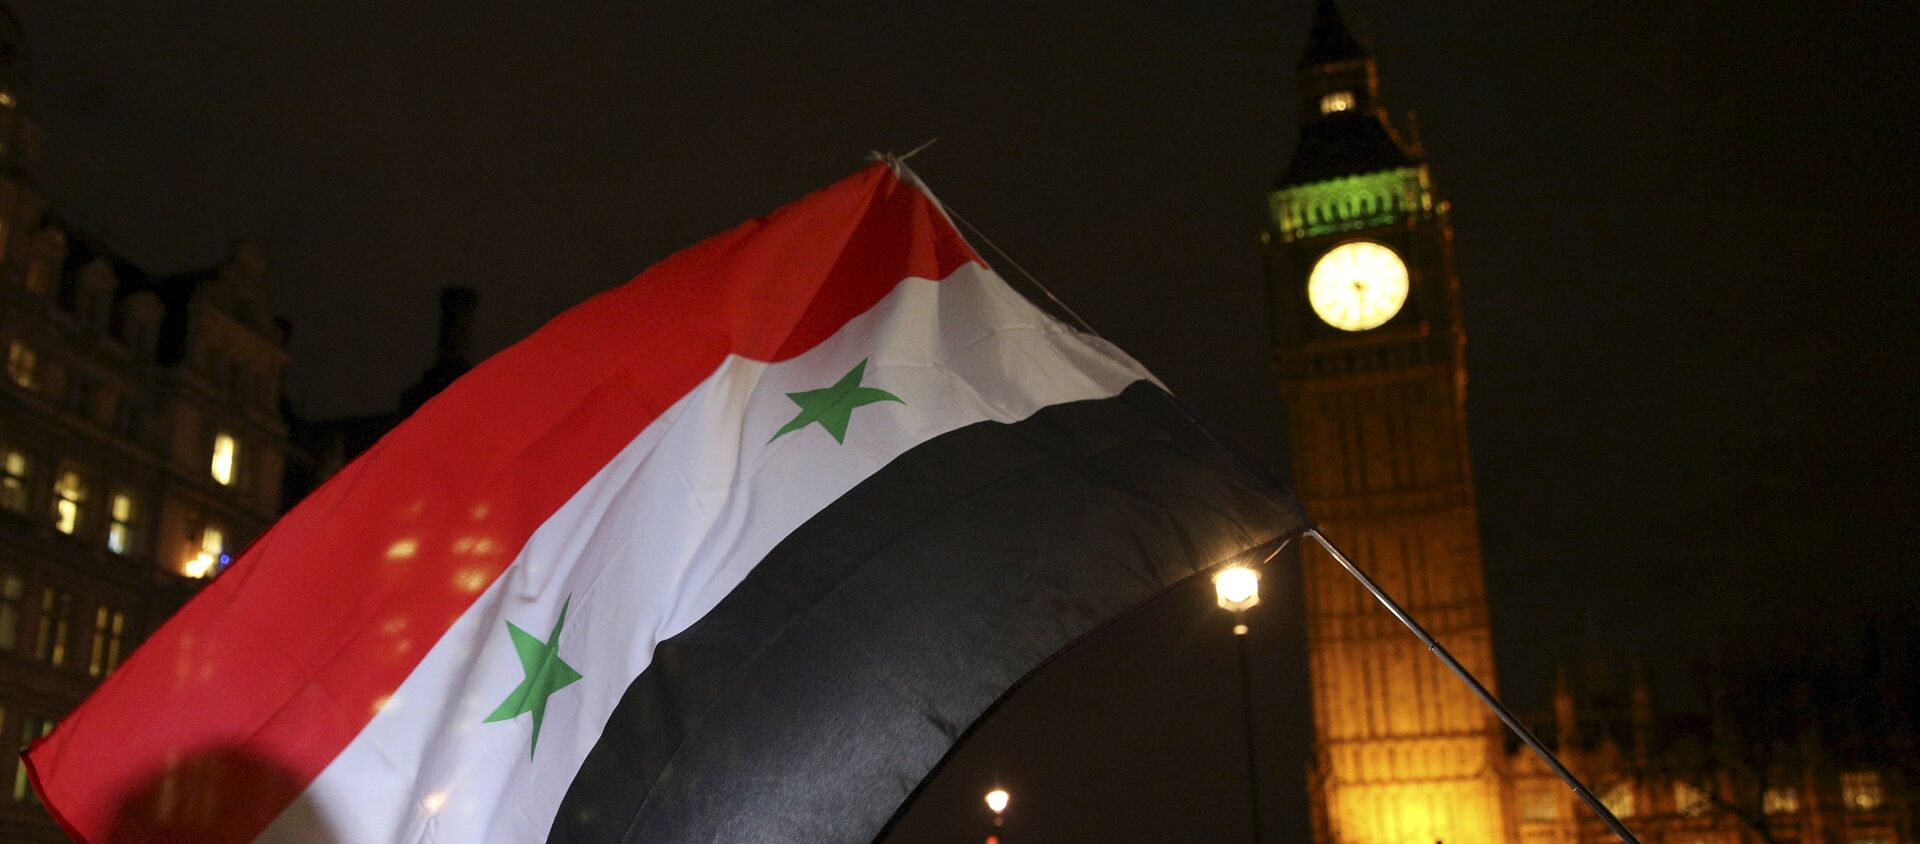 Anti-war protesters wave a Syrian flag as they demonstrate against proposals to bomb Syria outside the Houses of Parliament in London, Britain December 1, 2015. - Sputnik International, 1920, 19.09.2019